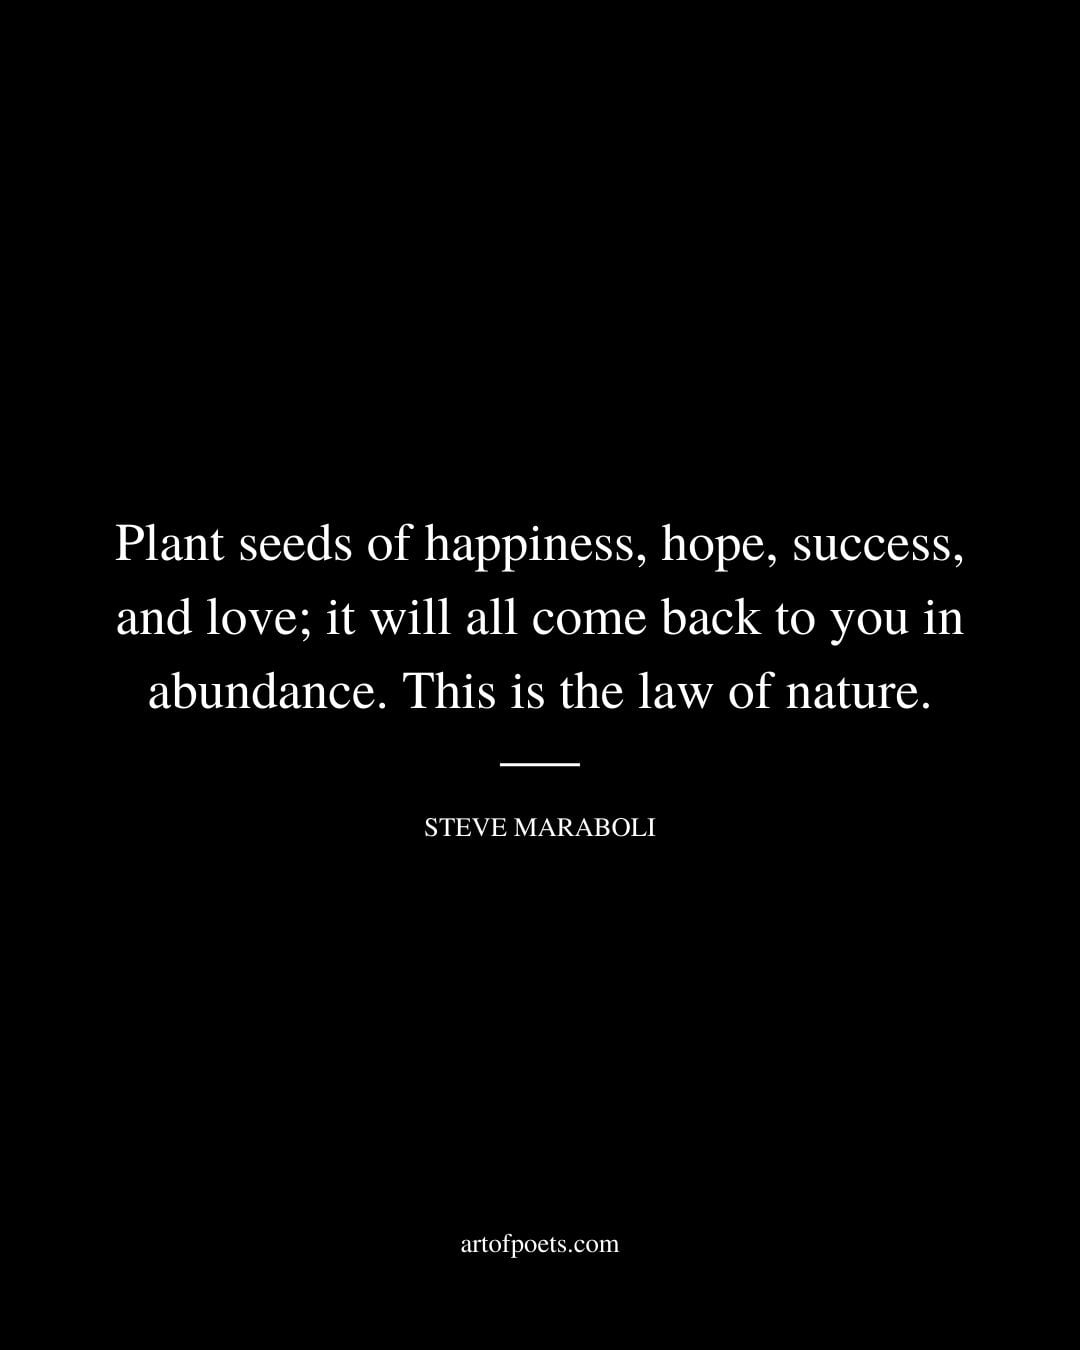 Plant seeds of happiness hope success and love it will all come back to you in abundance. This is the law of nature. –Steve Maraboli